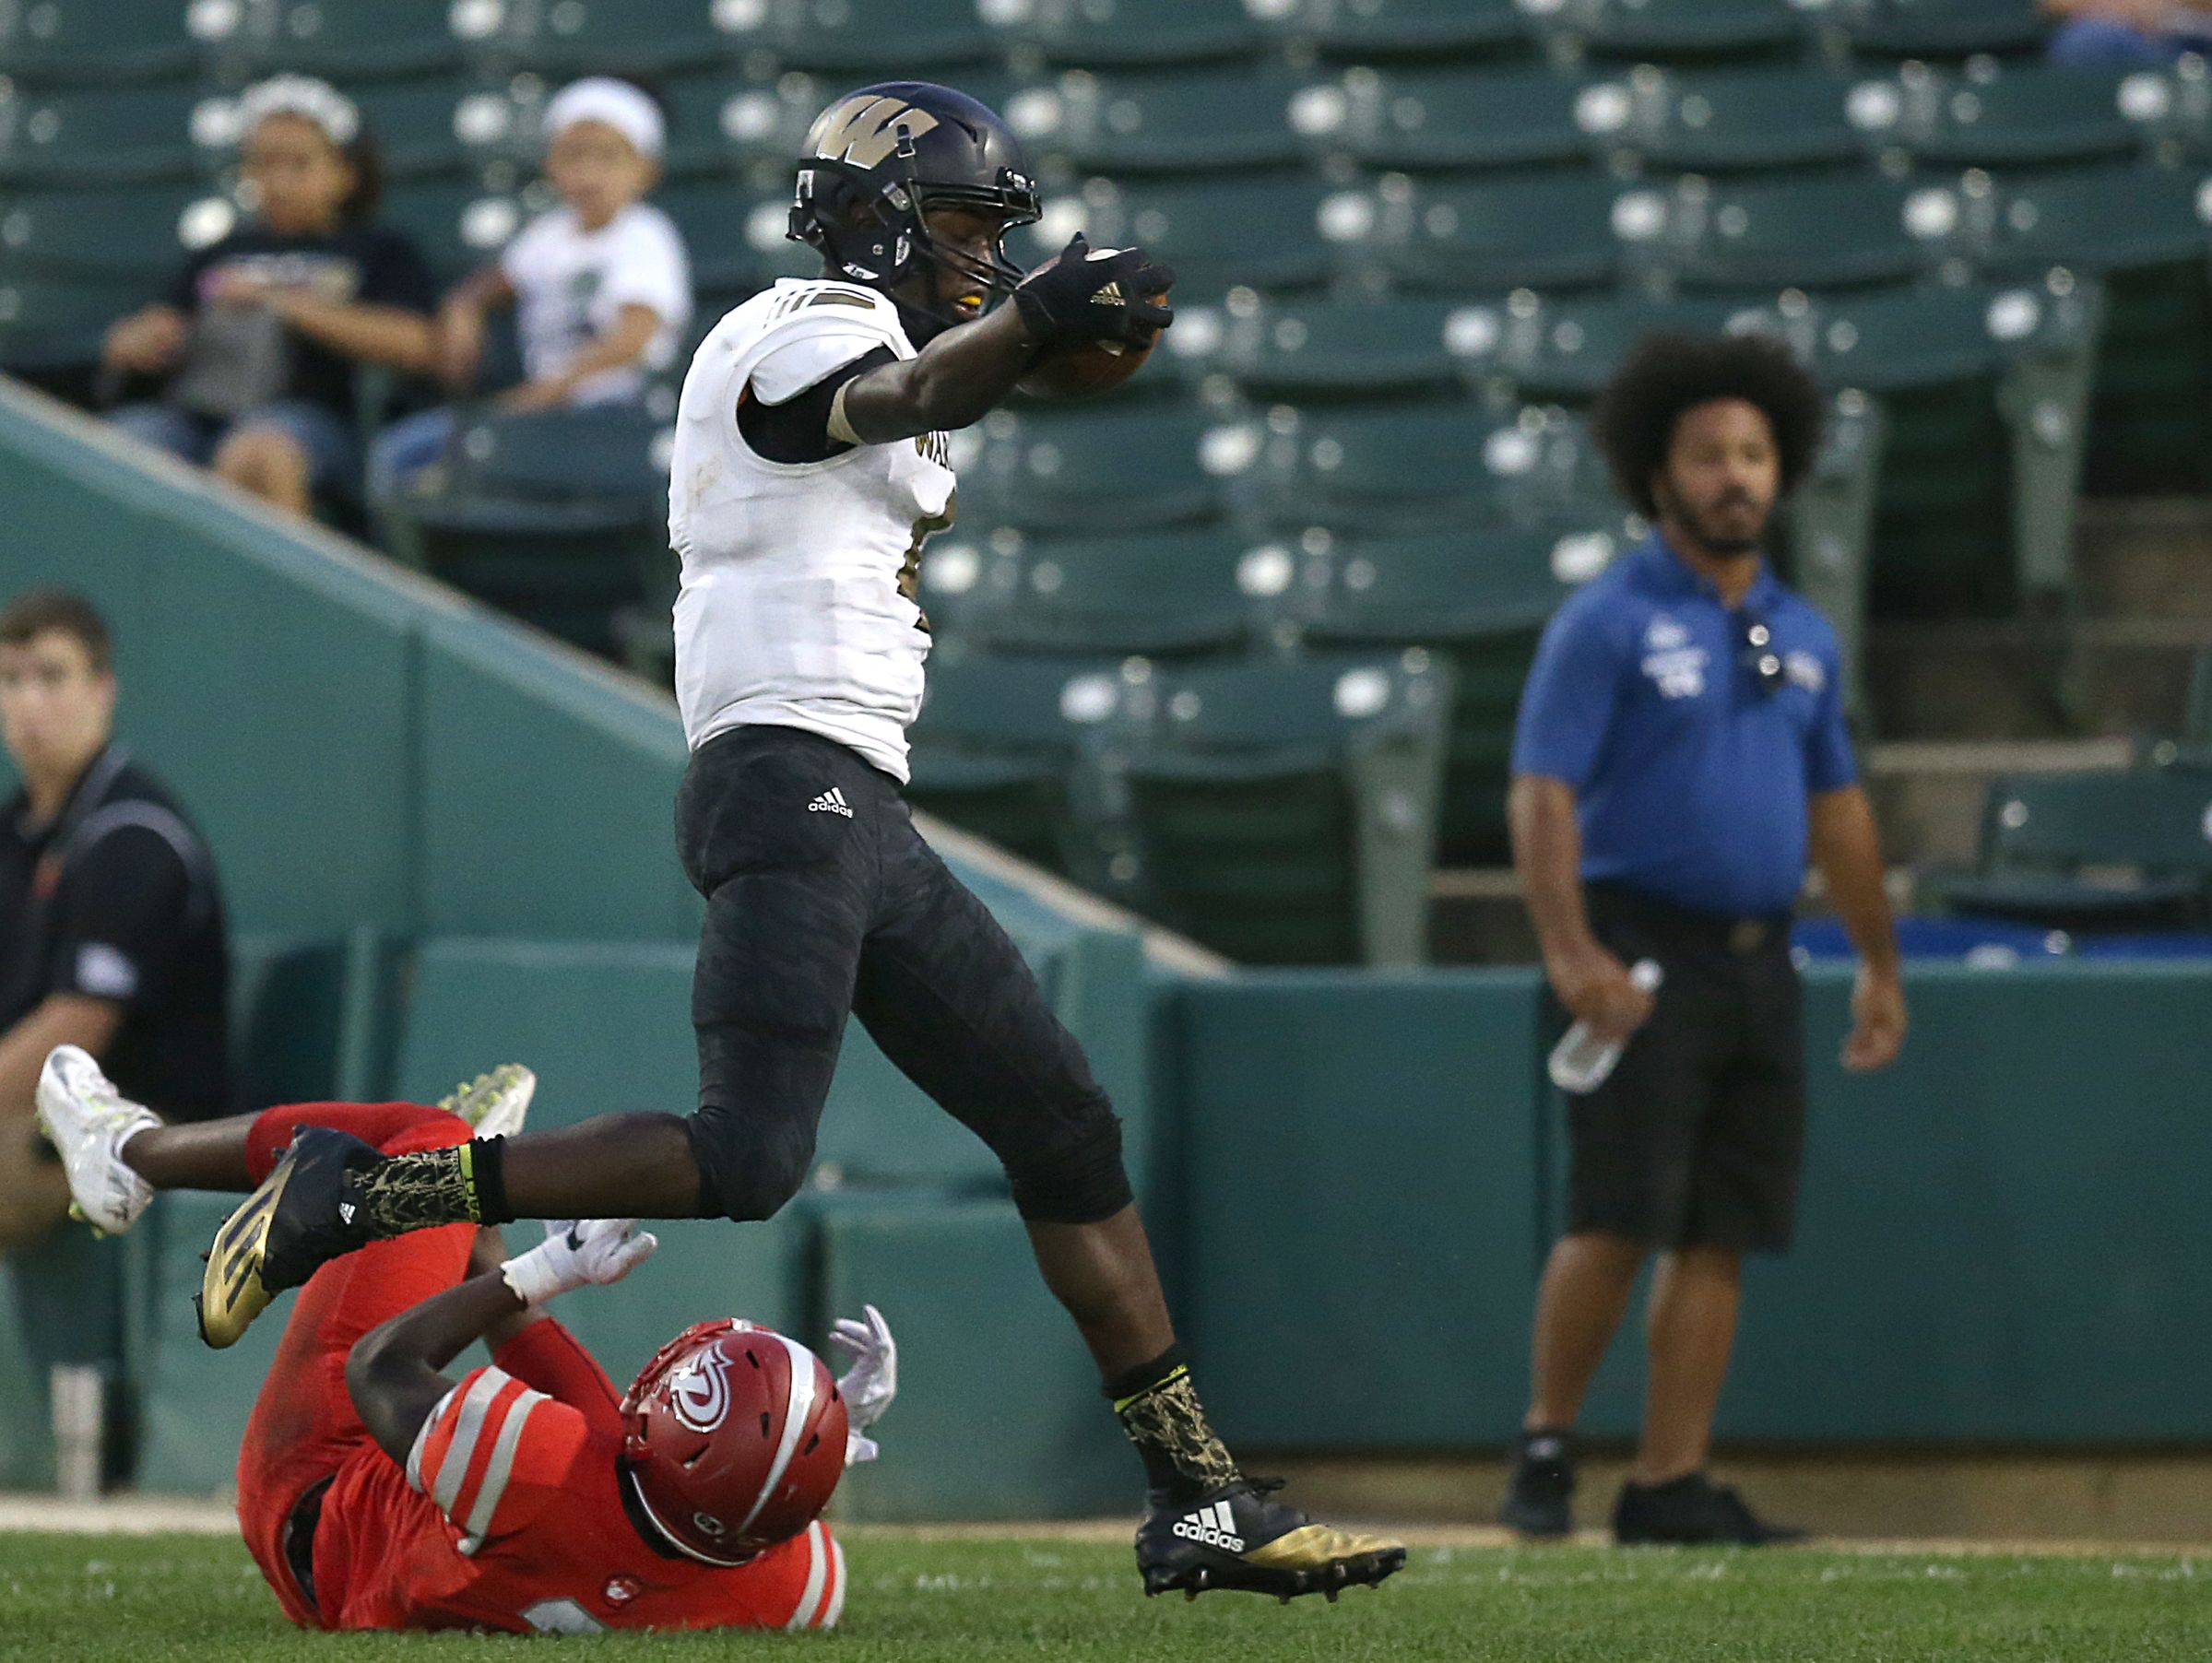 Warren Central Warriors wide receiver David Bell (4) runs in a touch down during first half action of the Gridiron Classic at Victory Field, Indianapolis, Friday, September 23, 2016.